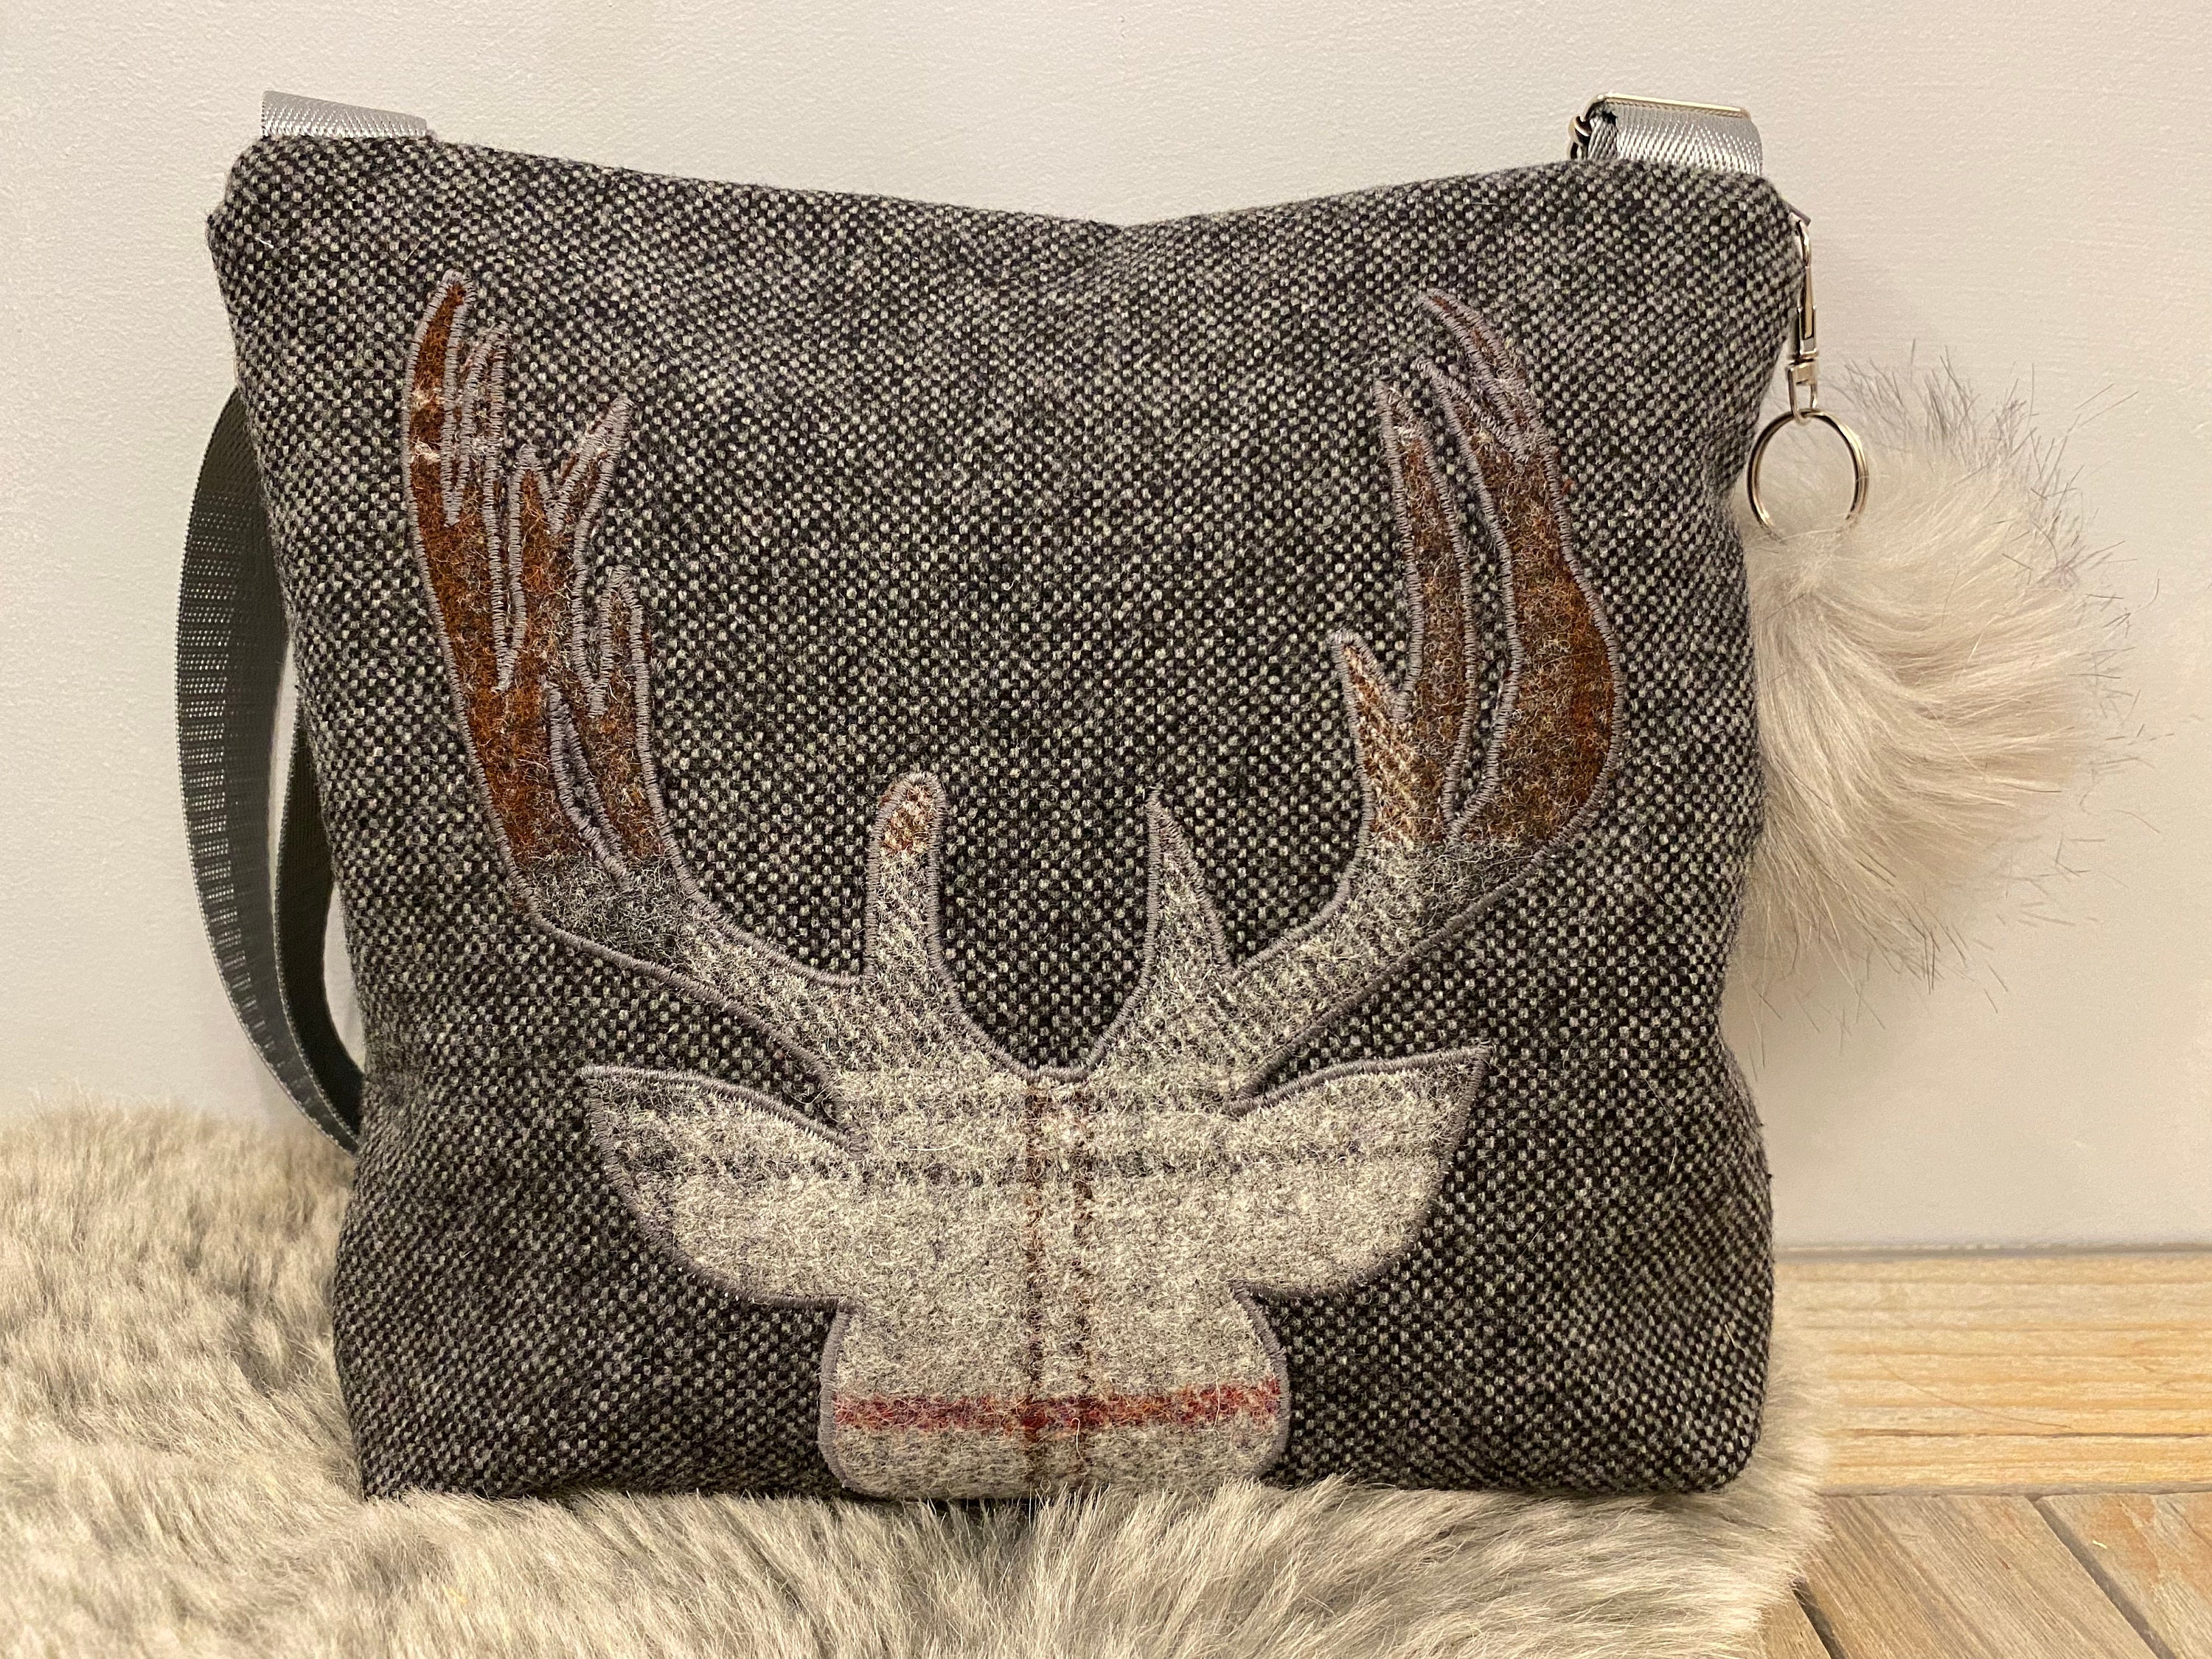 Matching Triple Layer Face Mask & Purse available separately Beautiful Handmade Genuine 100% Harris Tweed Wool Tote Bag